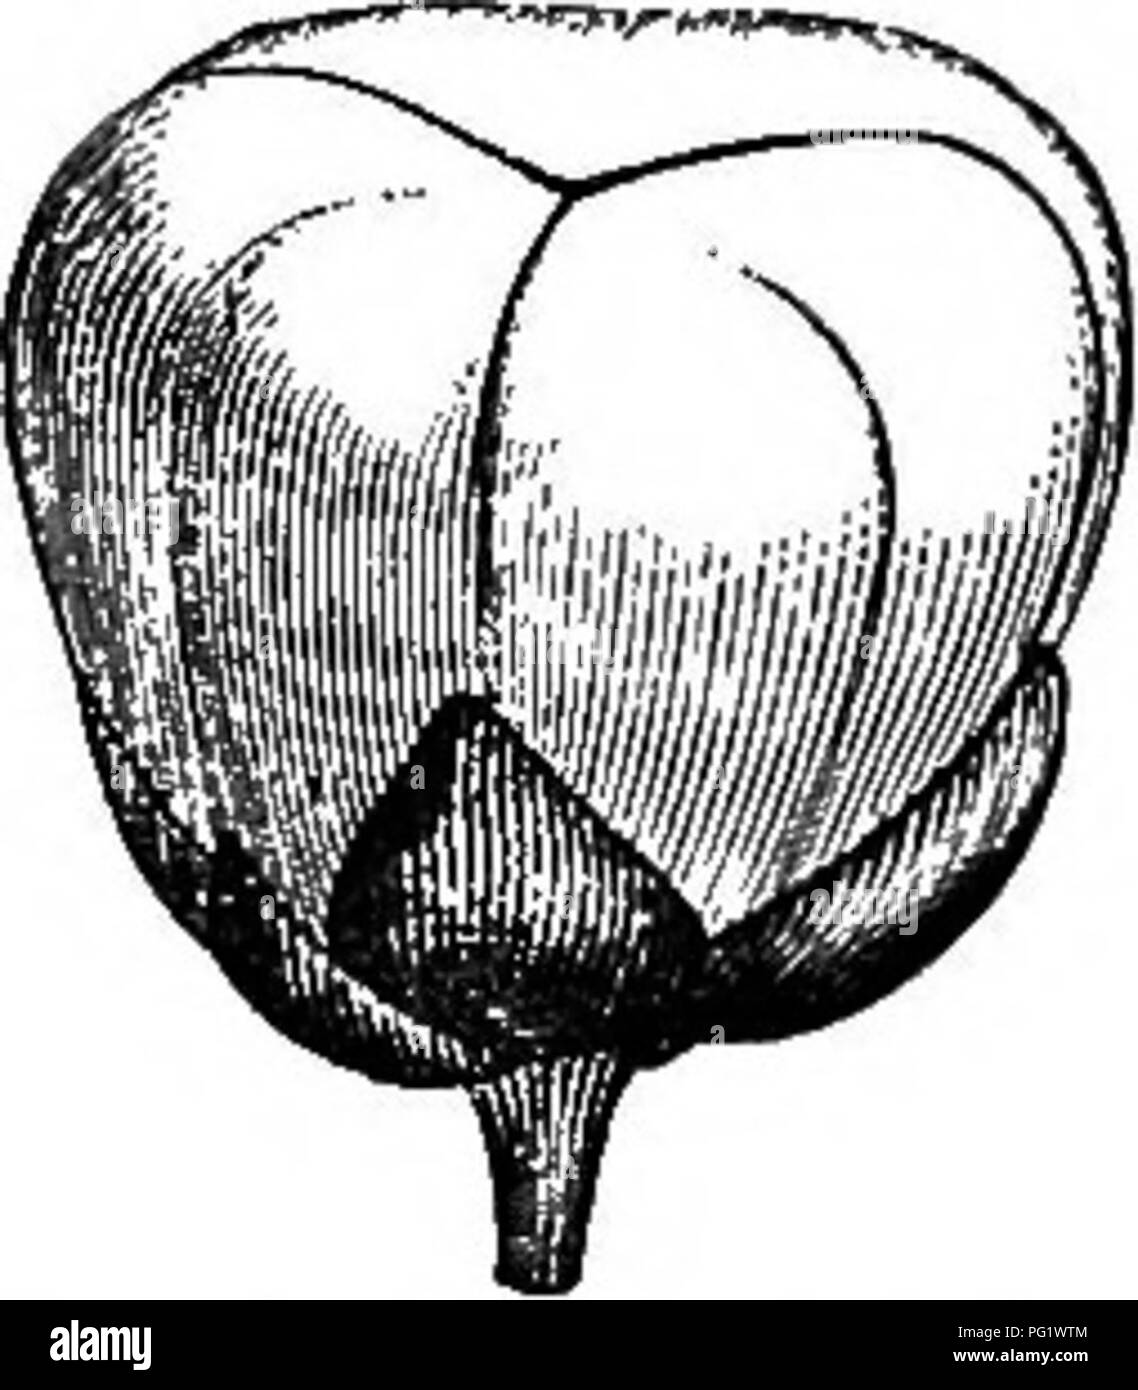 . The natural history of plants. Botany. 346 NATURAL HISTORY OF PLANTS. gltudinal placenta supporting two collateral or nearly superposed ovules, more or less ascendent, anatropous, with the raphe turned inwards, and the micropyle downwards and outwards. The fruit is formed of one, two, or three gibbous drupes with a stone more or less rugose and reticulate outwardly, and covered by a sarcocarp of vari- able thickness. In each stone is found two or, more often, one as- cendent, reniform seed, with albumen of little thickness or reduced to a simple membrane, enveloping a curved embryo, having l Stock Photo